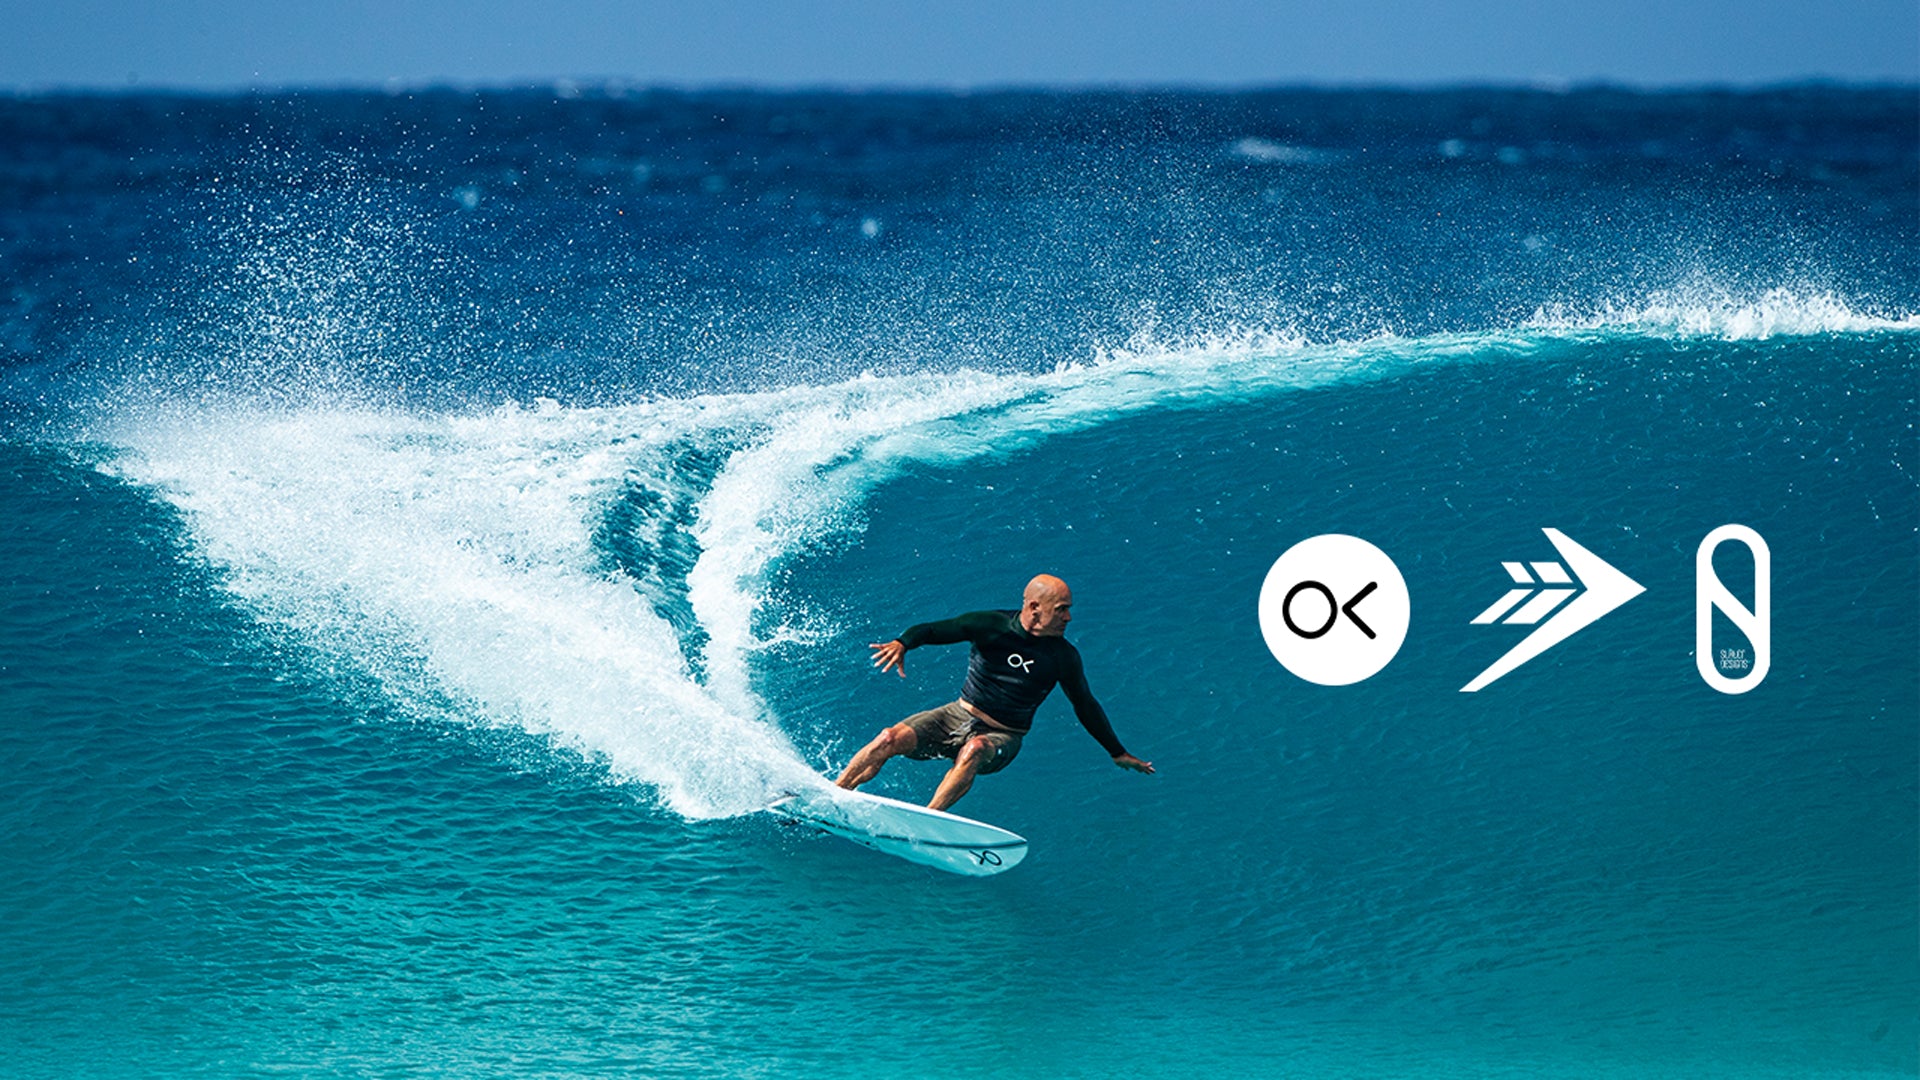 Outerknown, Firewire Surfboards, and Slater Designs Join Forces